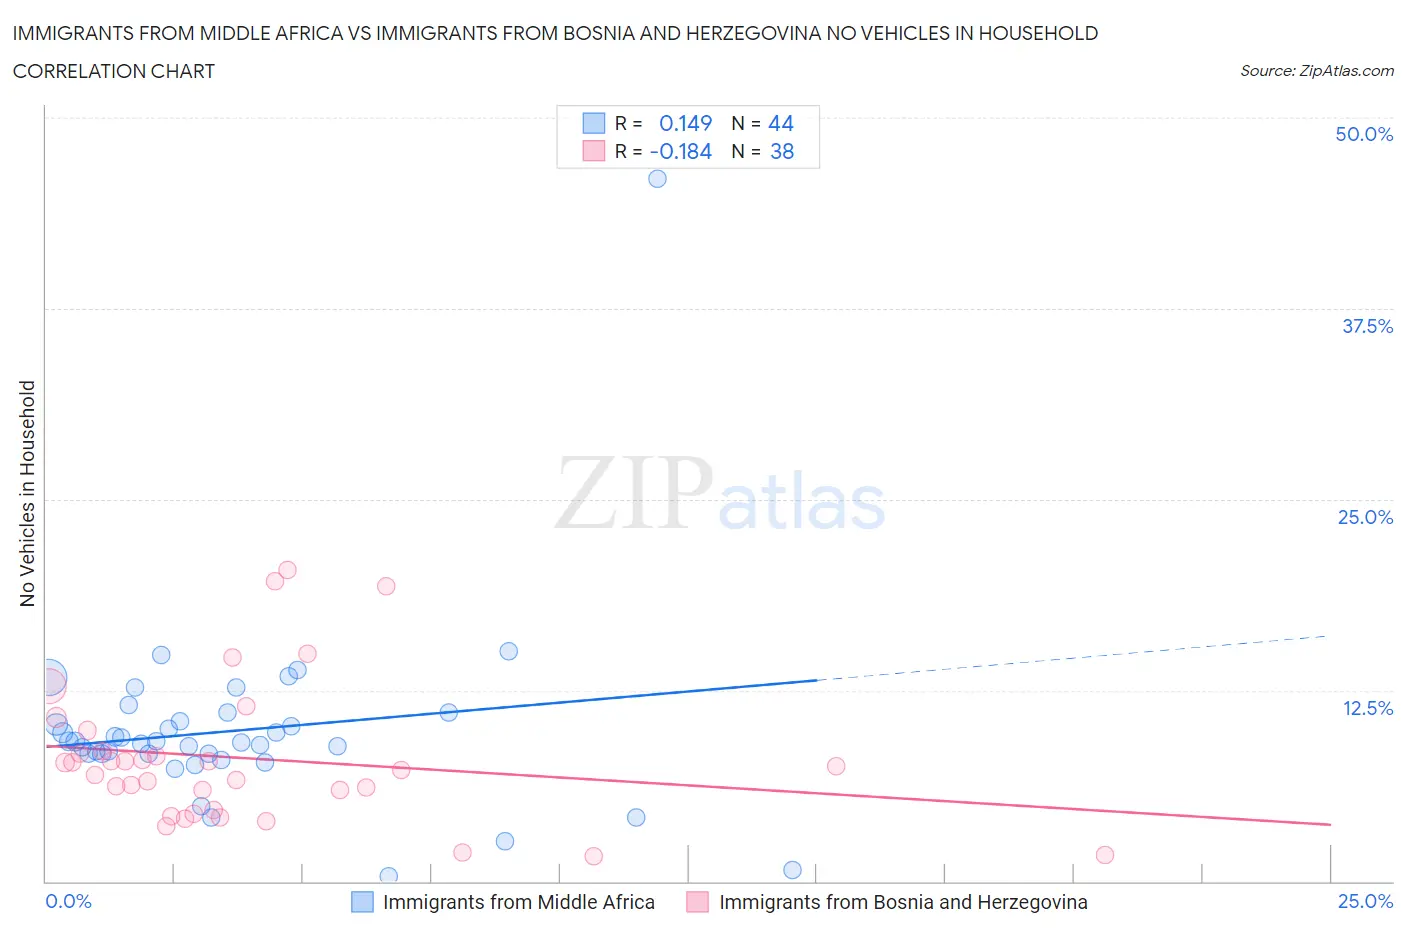 Immigrants from Middle Africa vs Immigrants from Bosnia and Herzegovina No Vehicles in Household